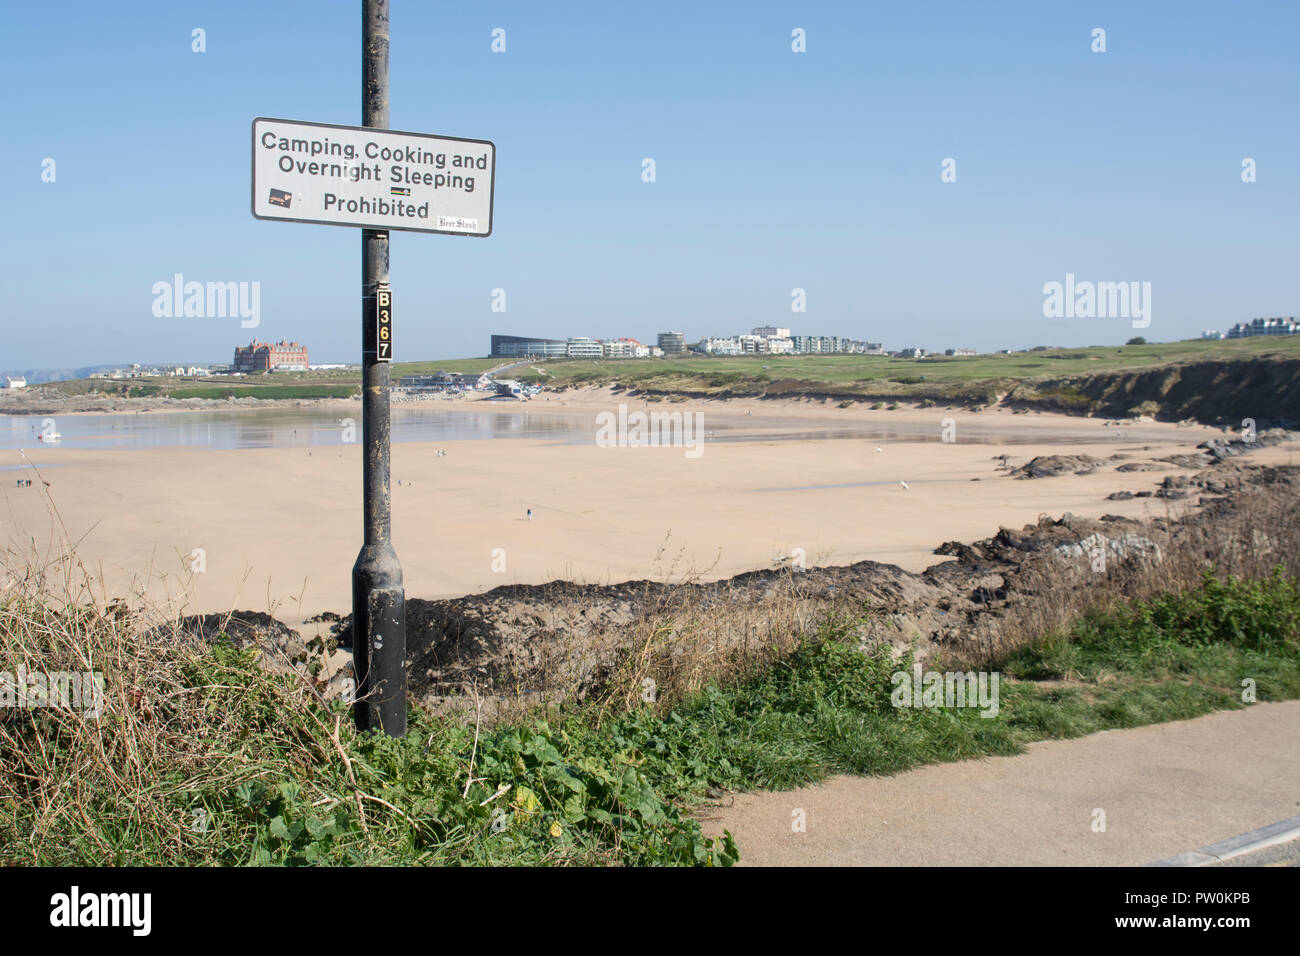 No camping sign on the cliff top at Newquay's Fistral beach - some surfers camp out in mini-vans and this must be a local deterrent. Stock Photo